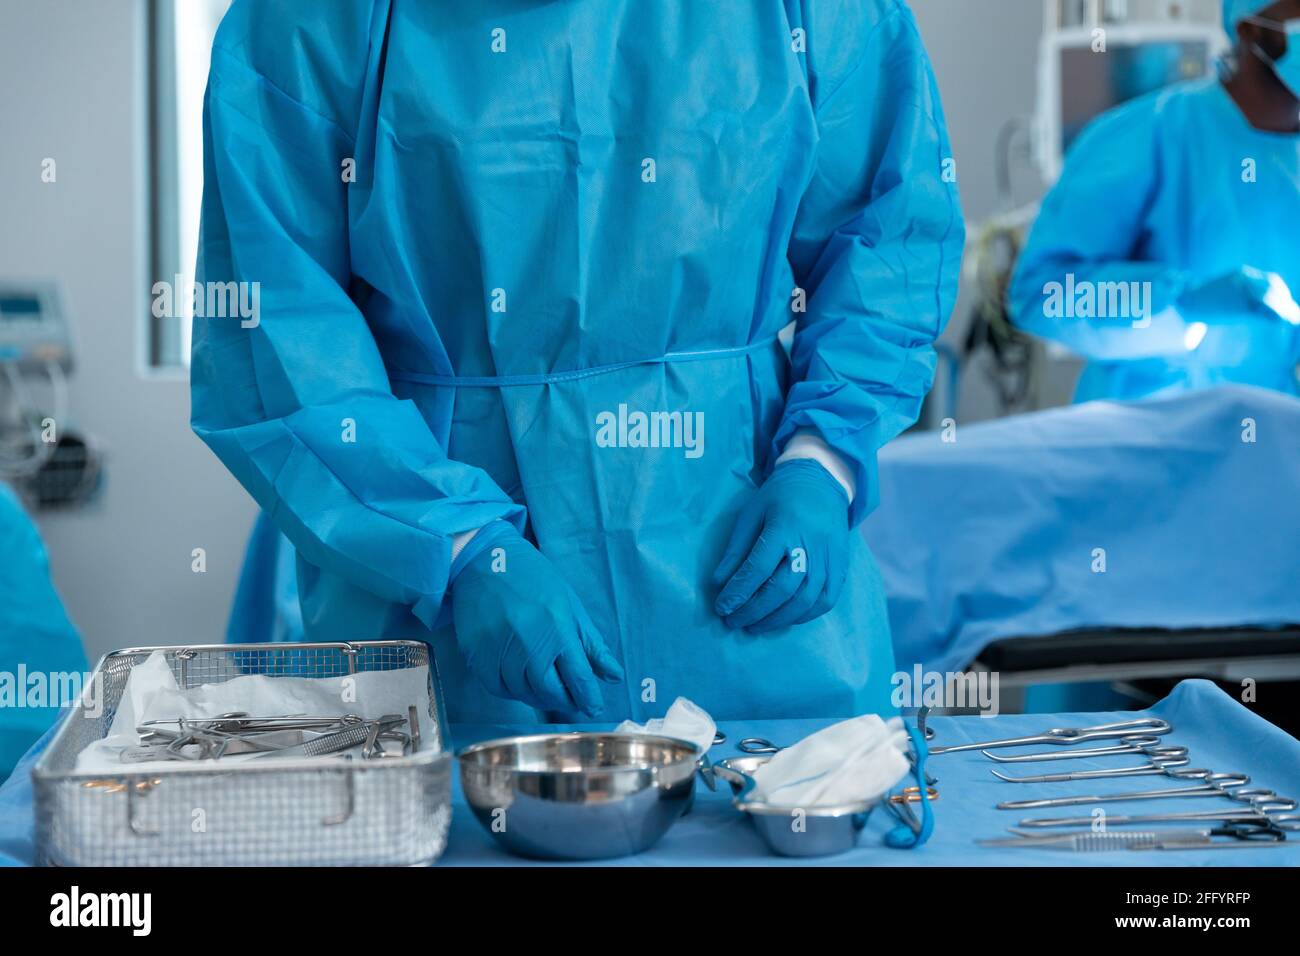 Midsection of male surgeon wearing protective clothing in operating theatre Stock Photo